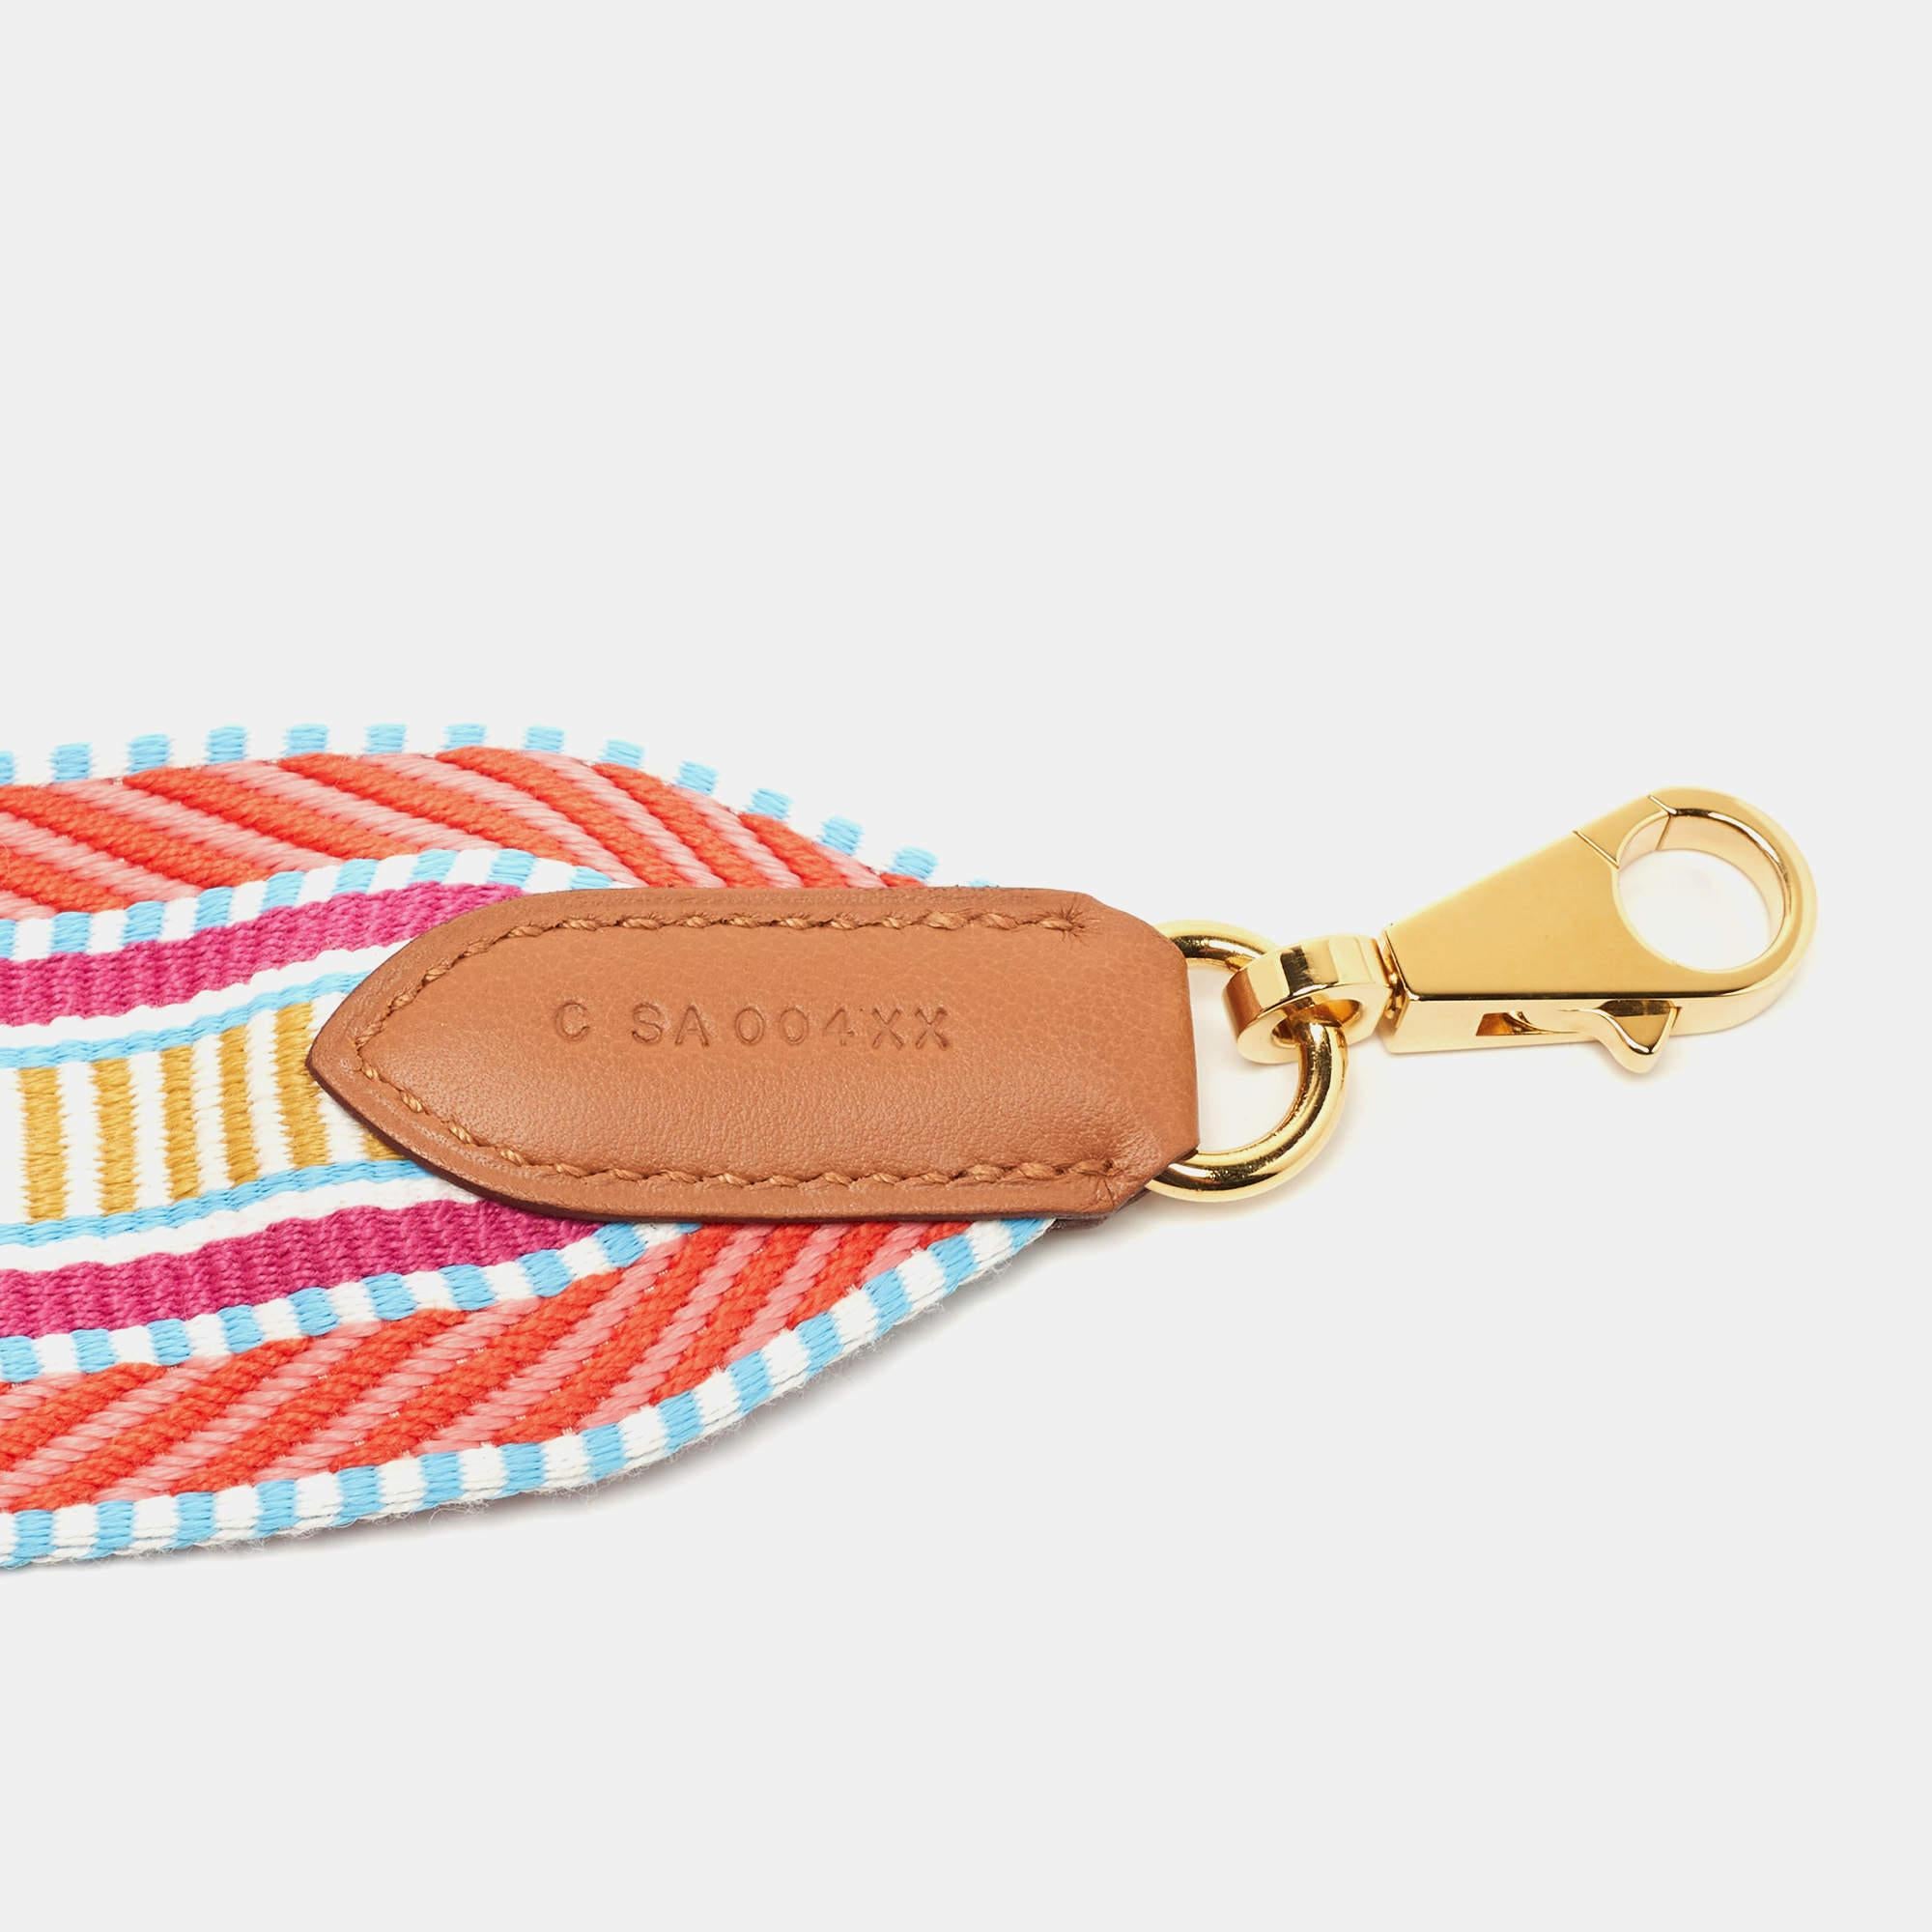 Color up your classy handbags with this bag strap from the House of Hermés. A luxurious accessory, this strap is super sturdy and easily complements any style.

Includes: Original Box